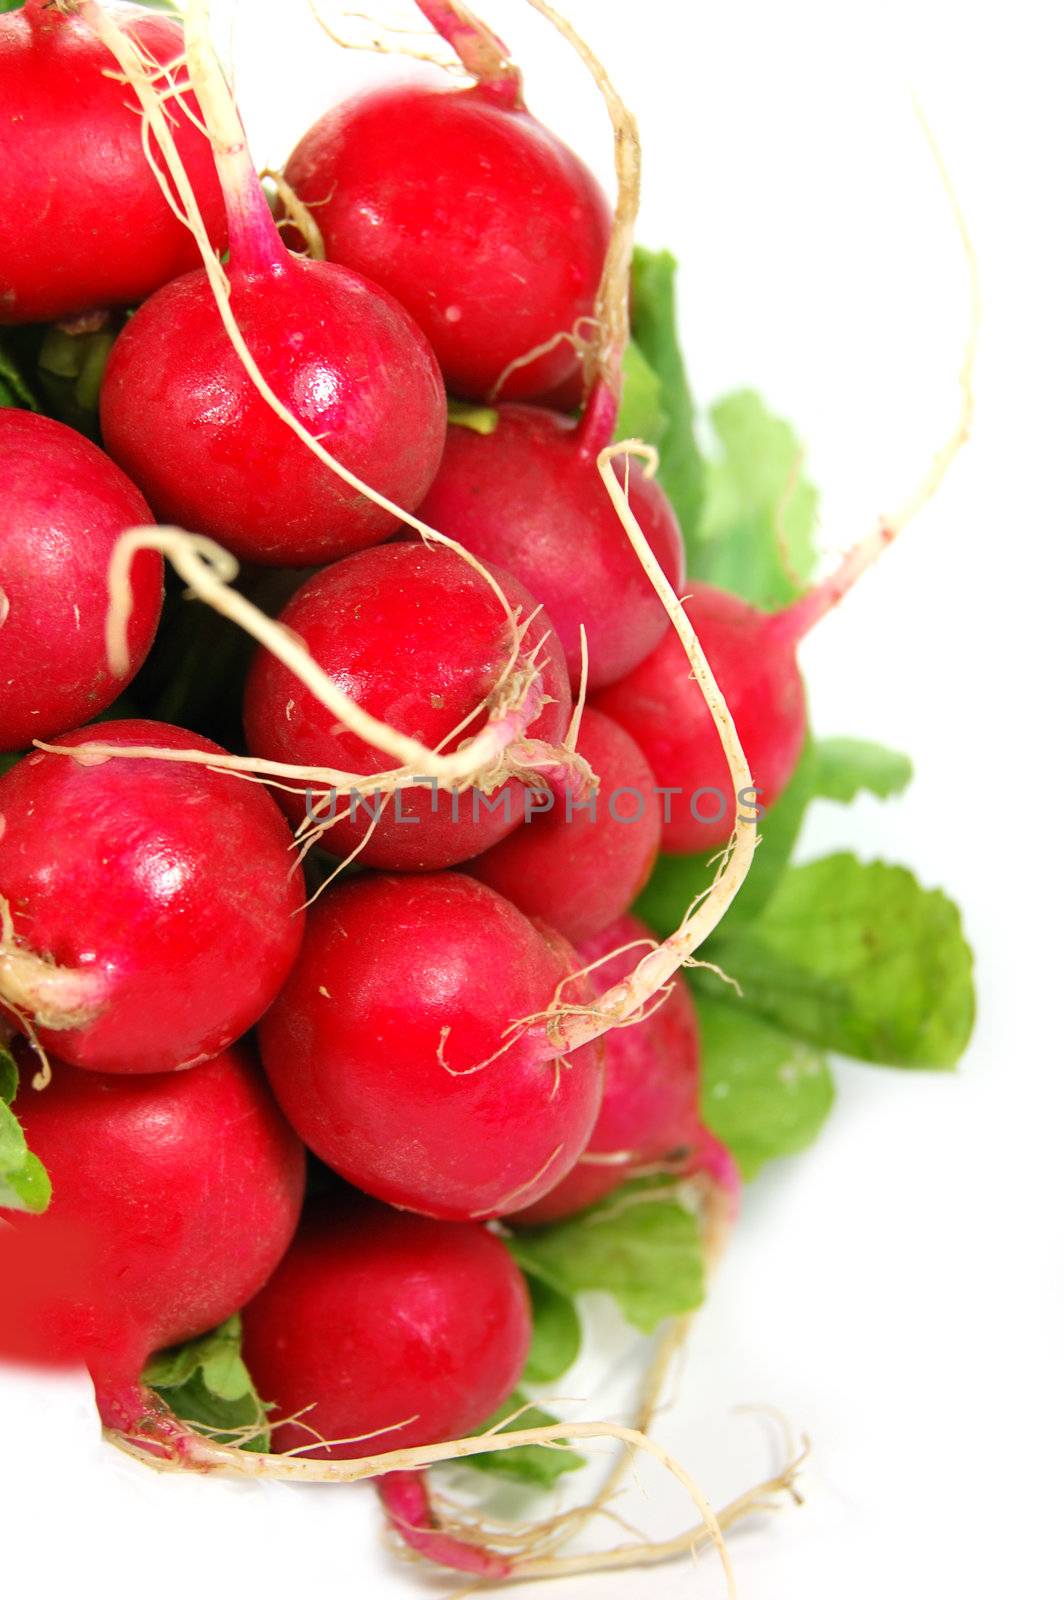 Radish with green ends isolated on white